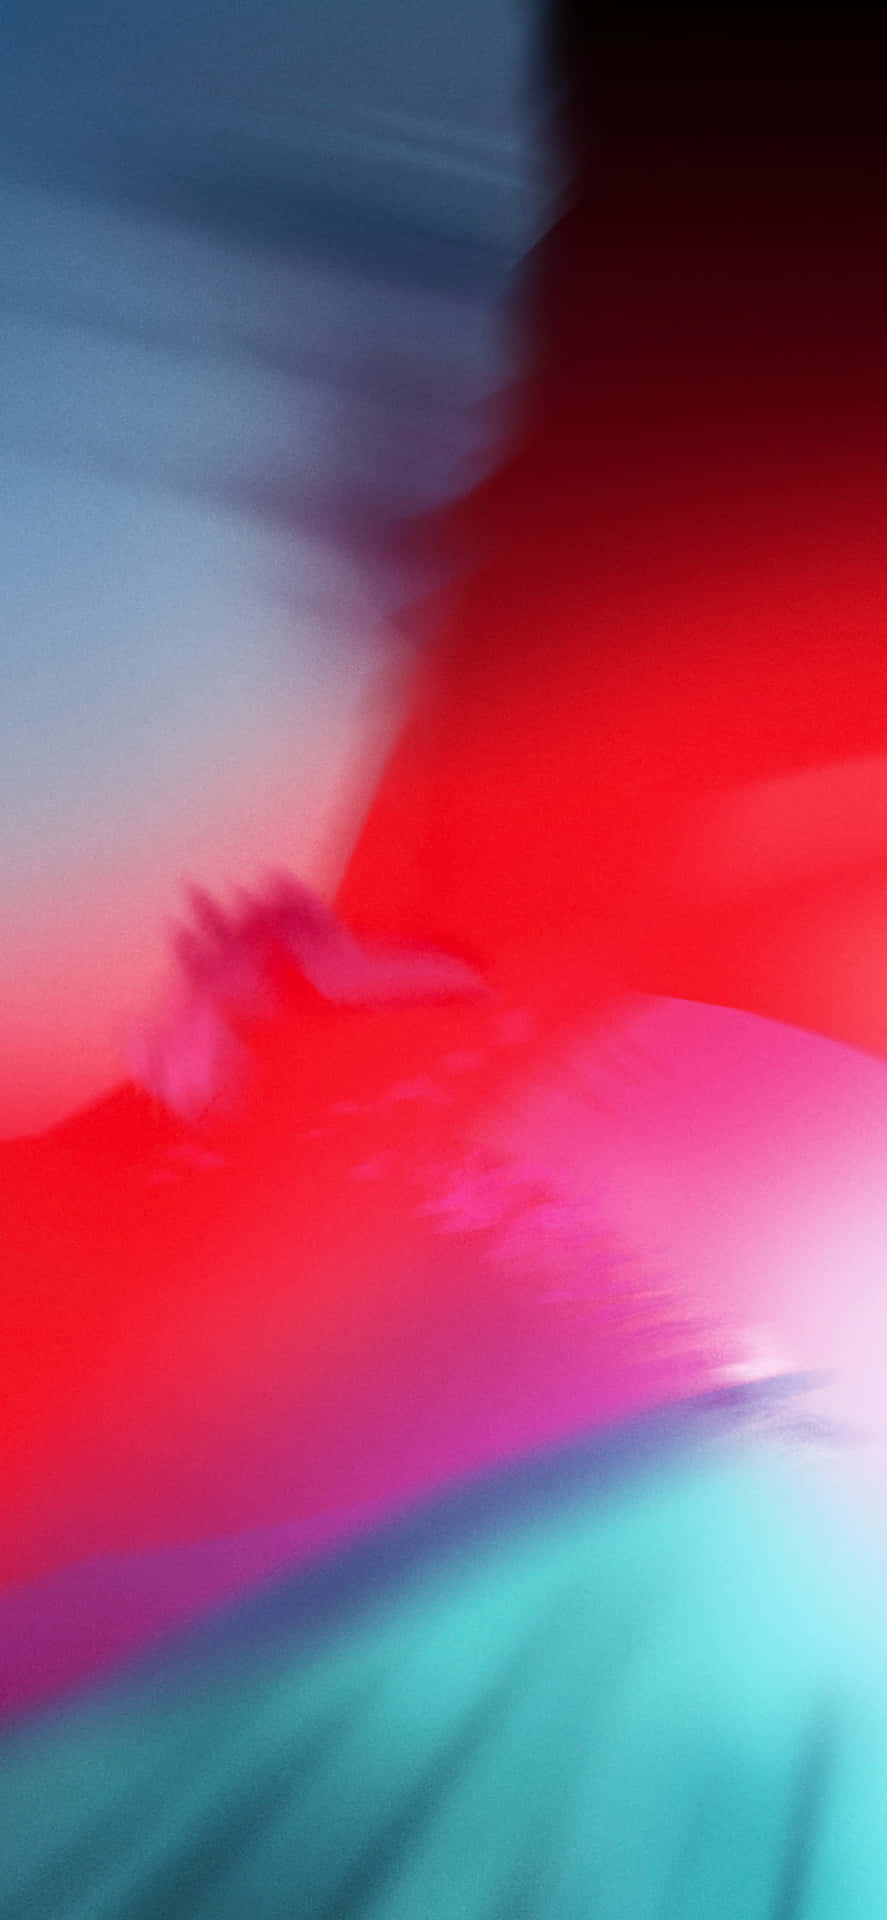 Download Iphone 12 Background | Wallpapers.com